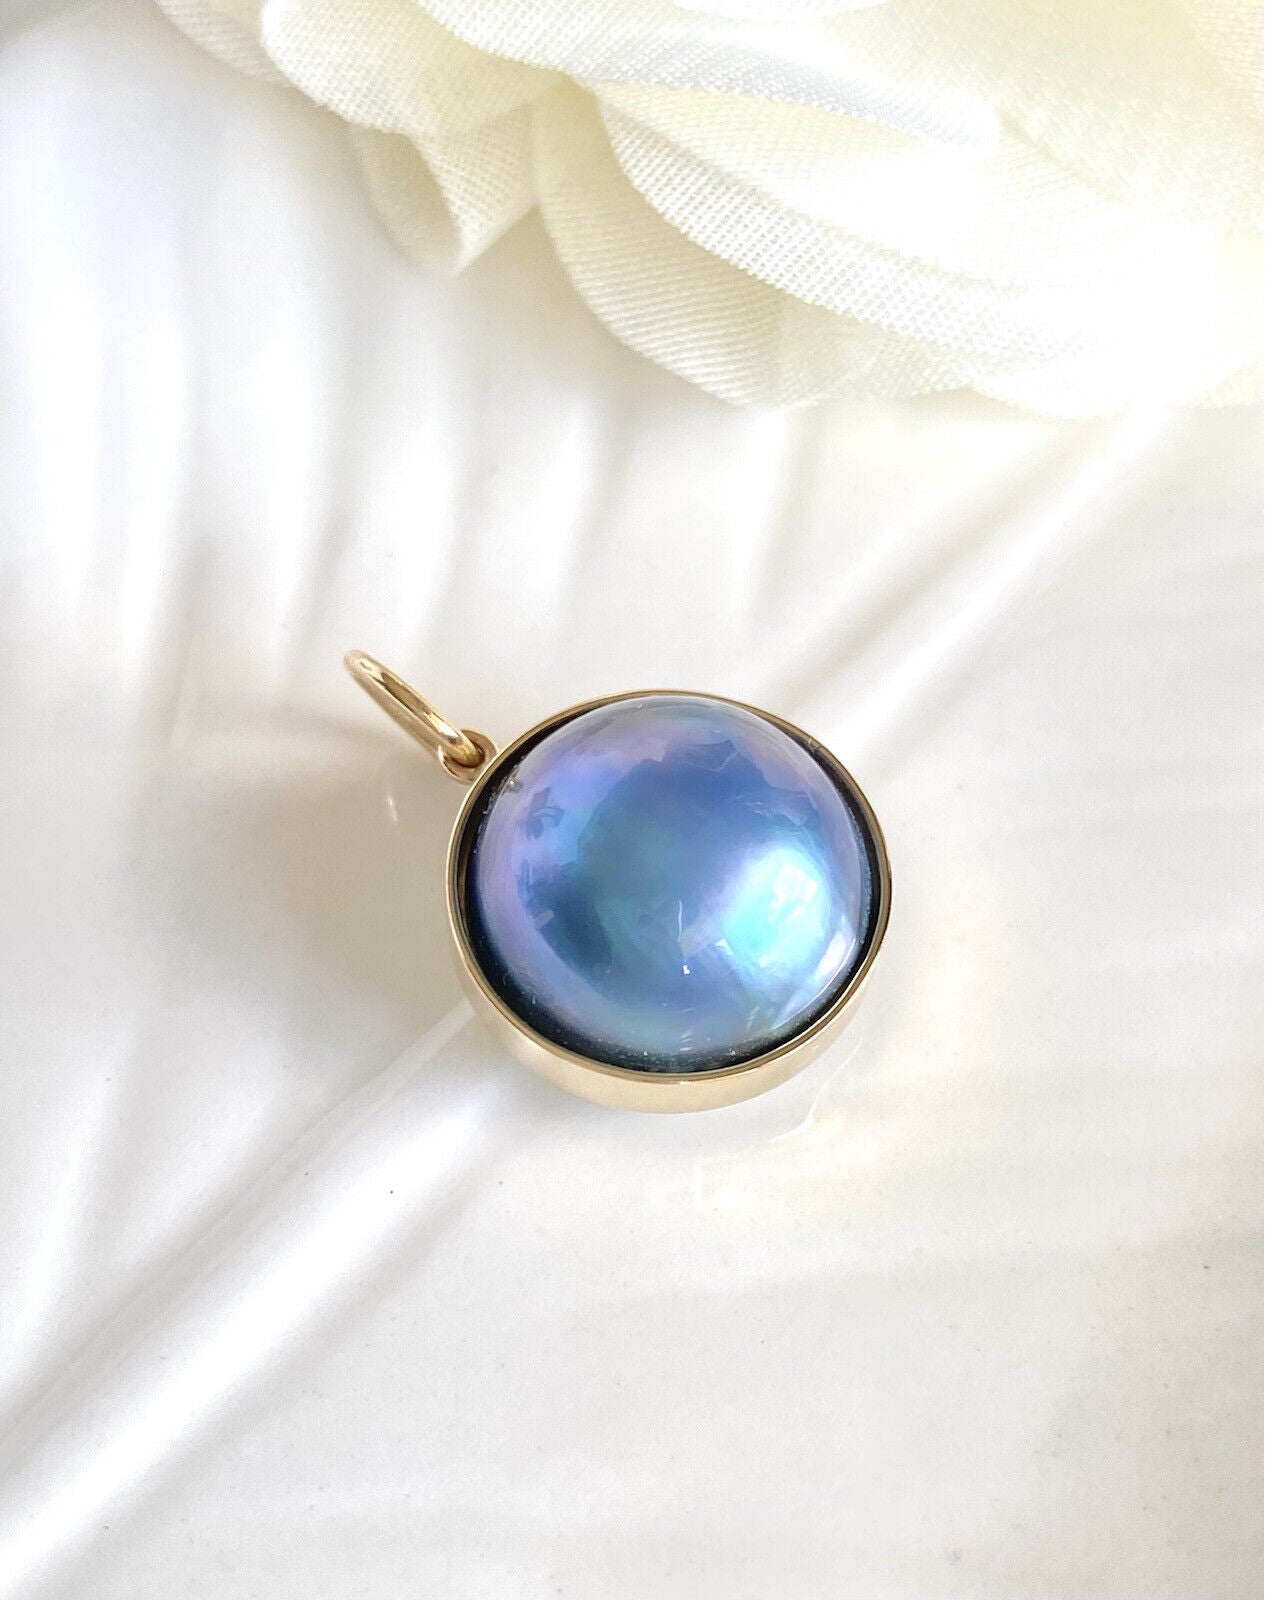 Genuine Peacock Blue Mabe Pearl (13mm) Solid 14K Yellow Gold Pendant, New #1